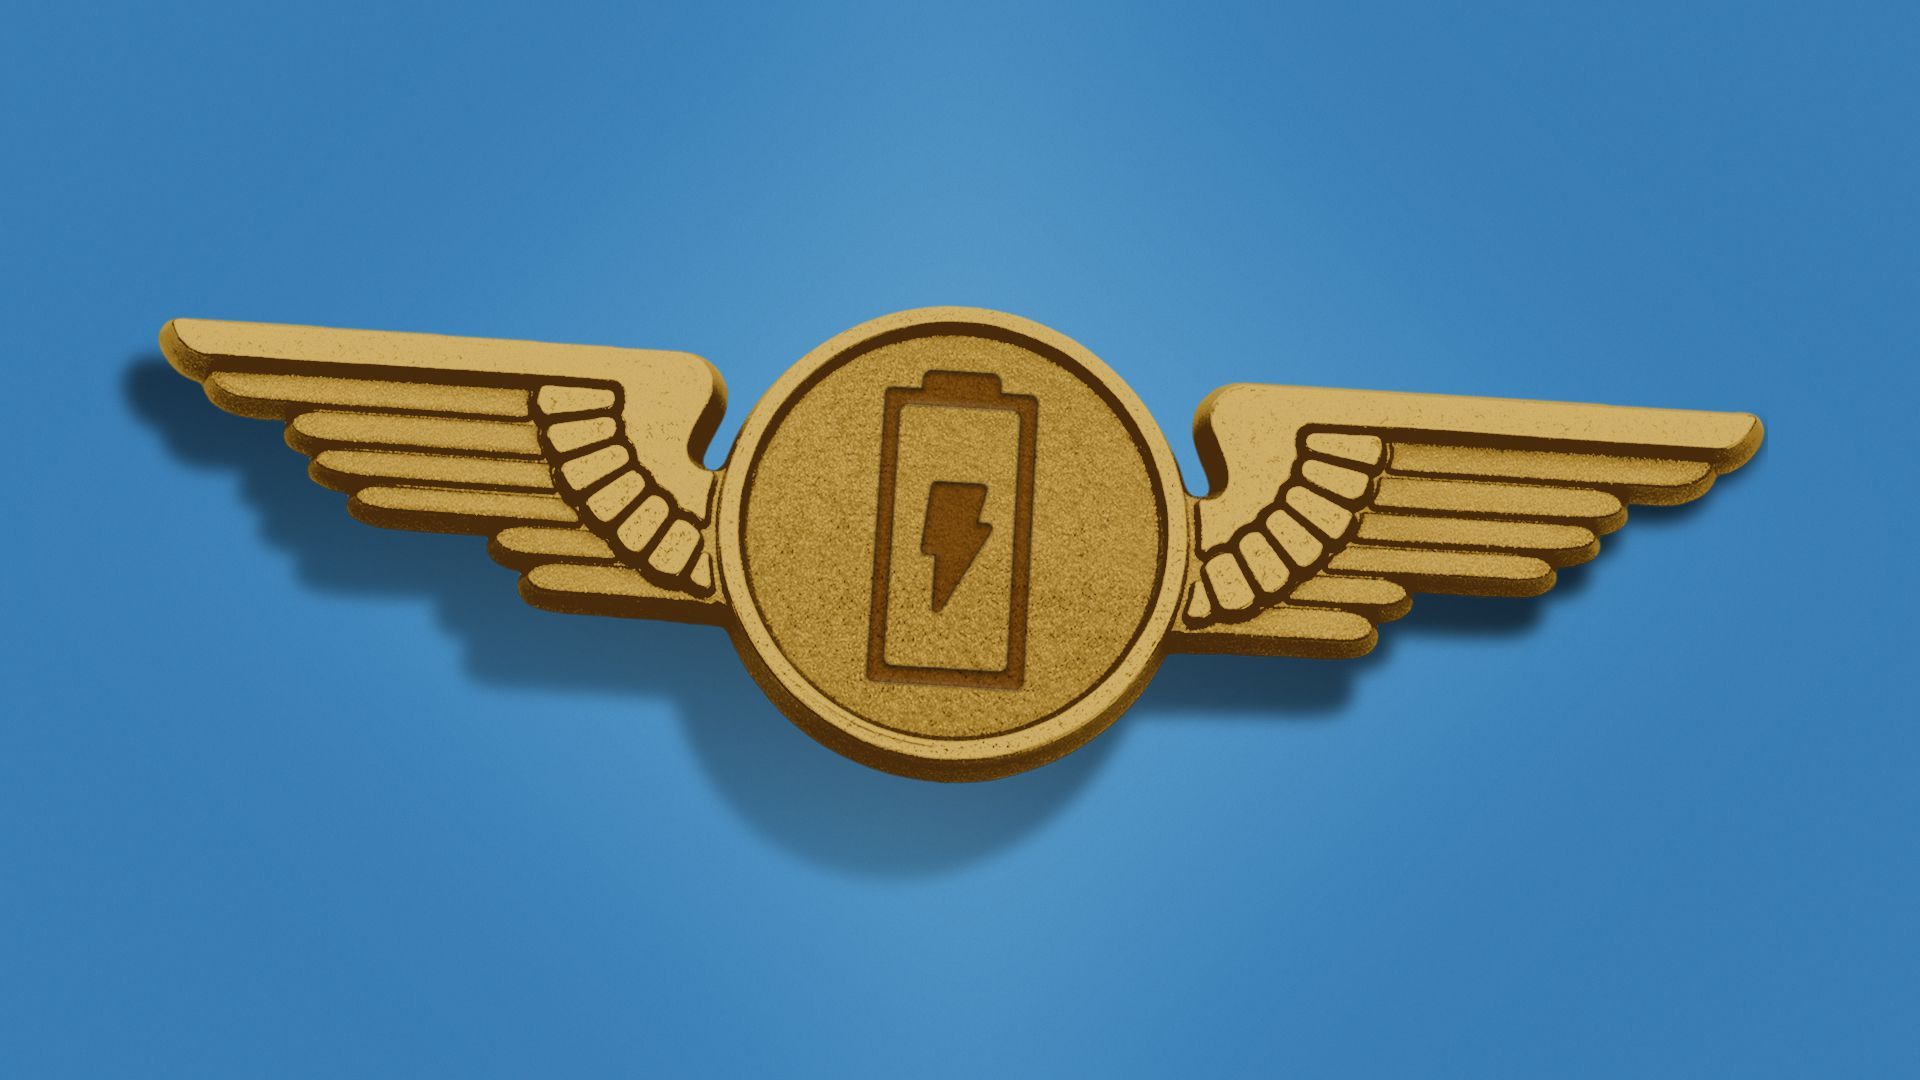 Illustration of pilot wings emblem with a symbol of a charging battery.